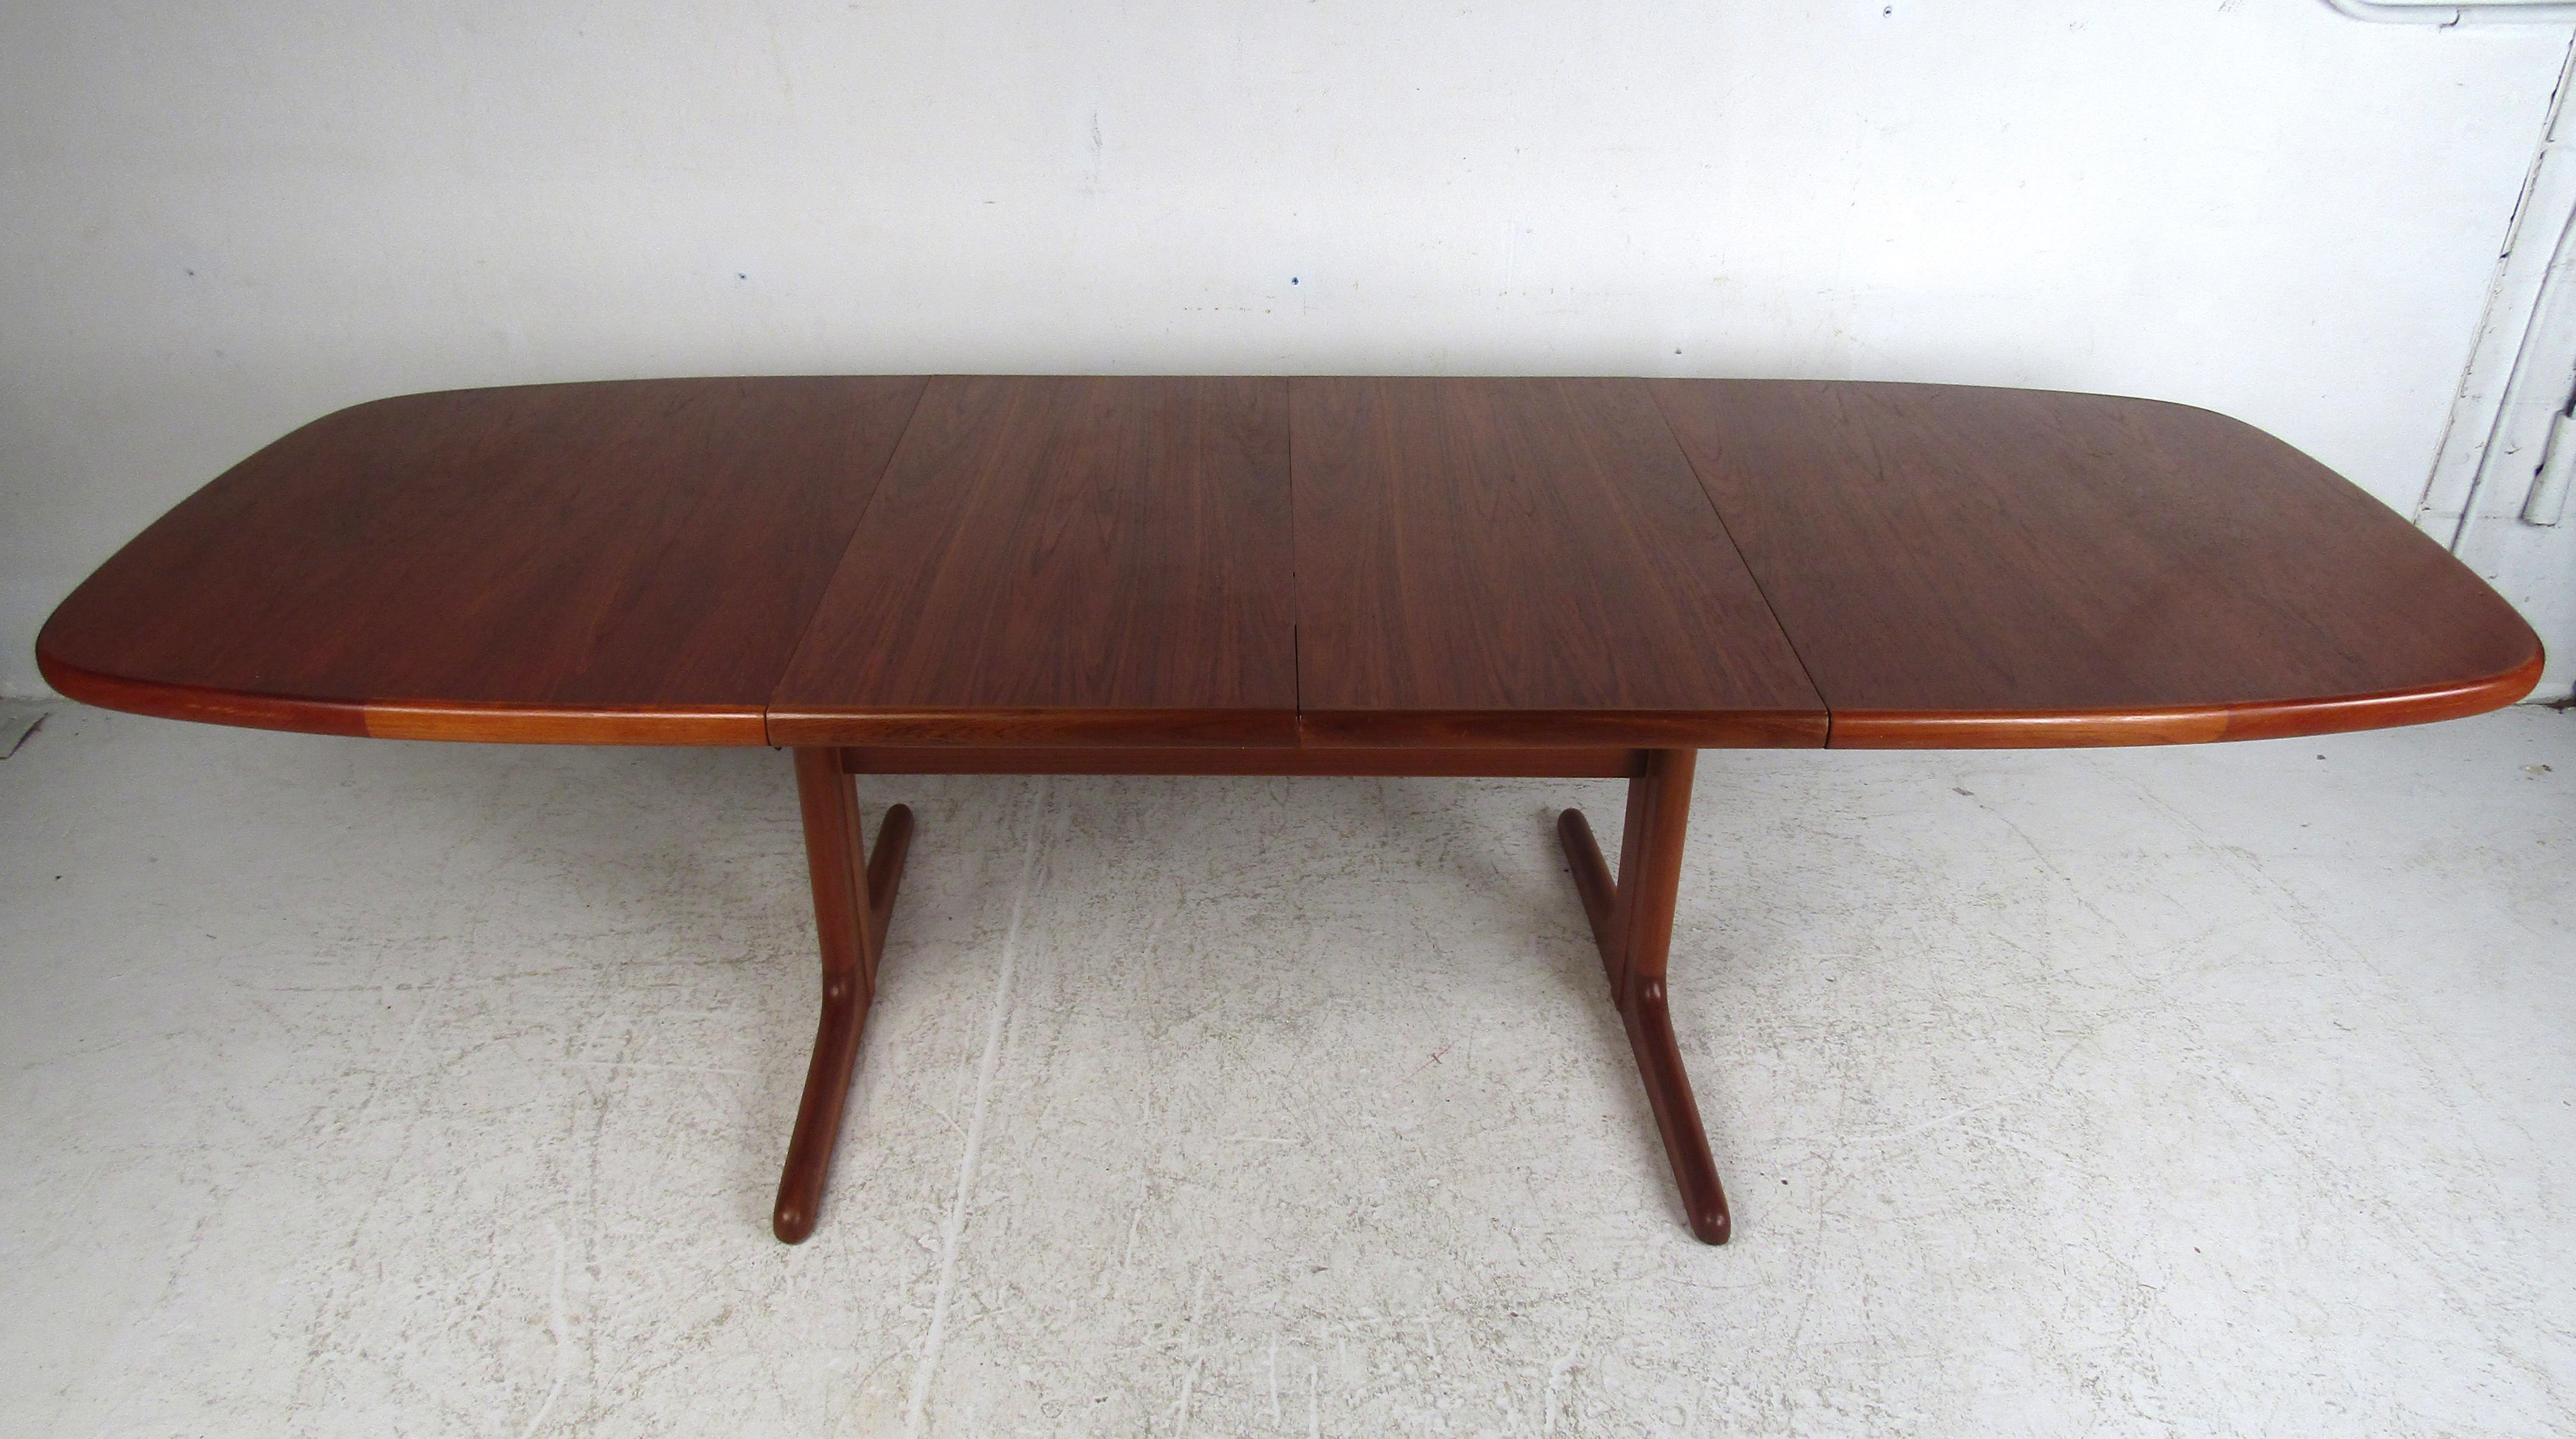 This stunning vintage Danish modern dining table boasts an unusual sled leg base with a stretcher that runs horizontally for added support. Two leaves enable this dining table to extend from 65 inches wide all the way to 104.5 inches wide ensuring